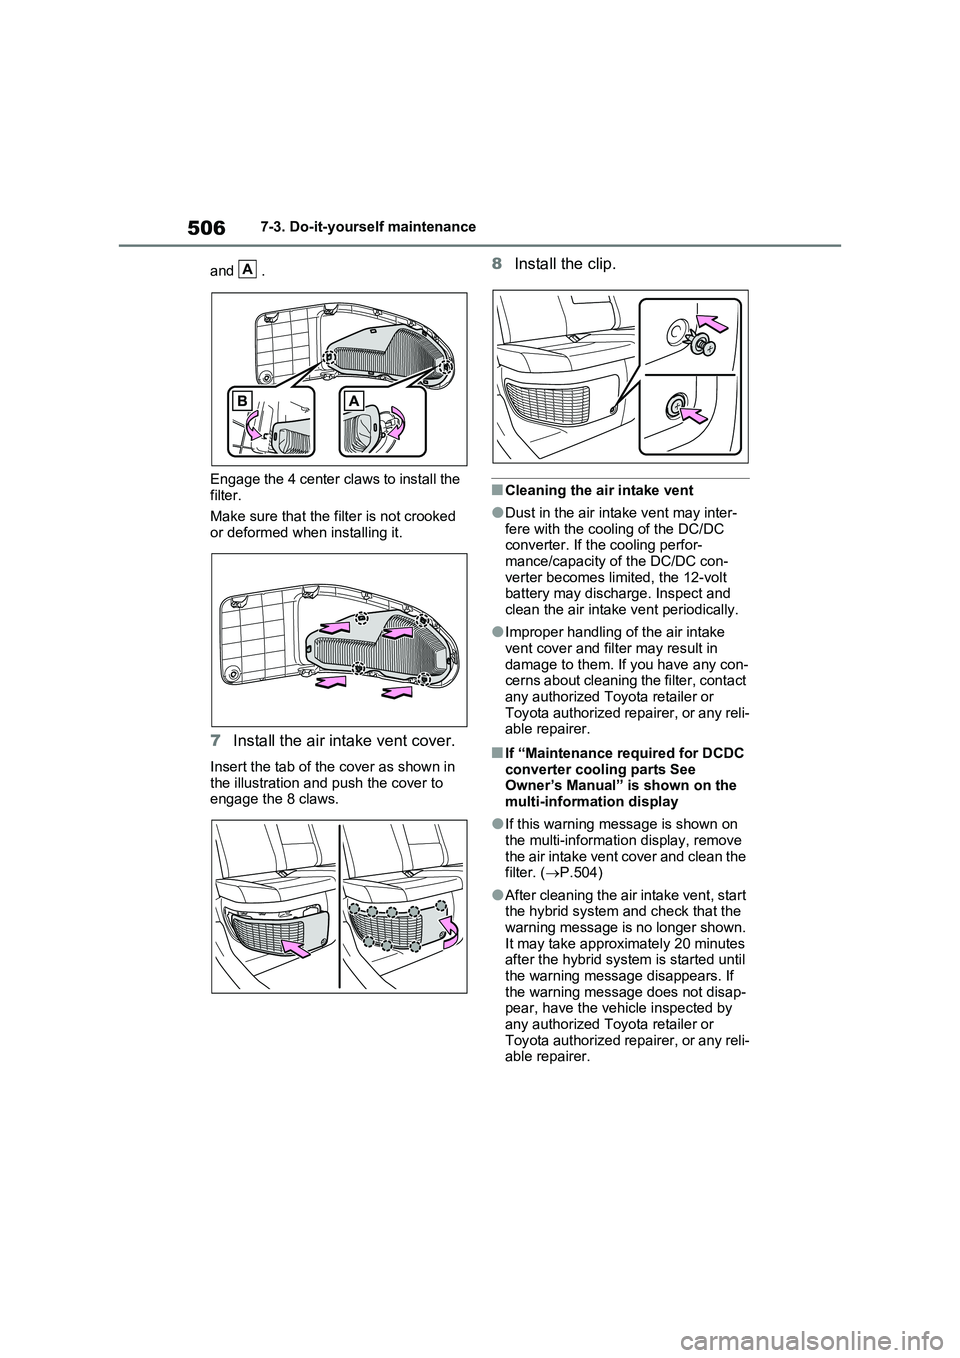 TOYOTA RAV4 PLUG-IN HYBRID 2023  Owners Manual 5067-3. Do-it-yourself maintenance
and .
Engage the 4 center claws to install the 
filter.
Make sure that the filter is not crooked 
or deformed when installing it.
7Install the air intake vent cover.